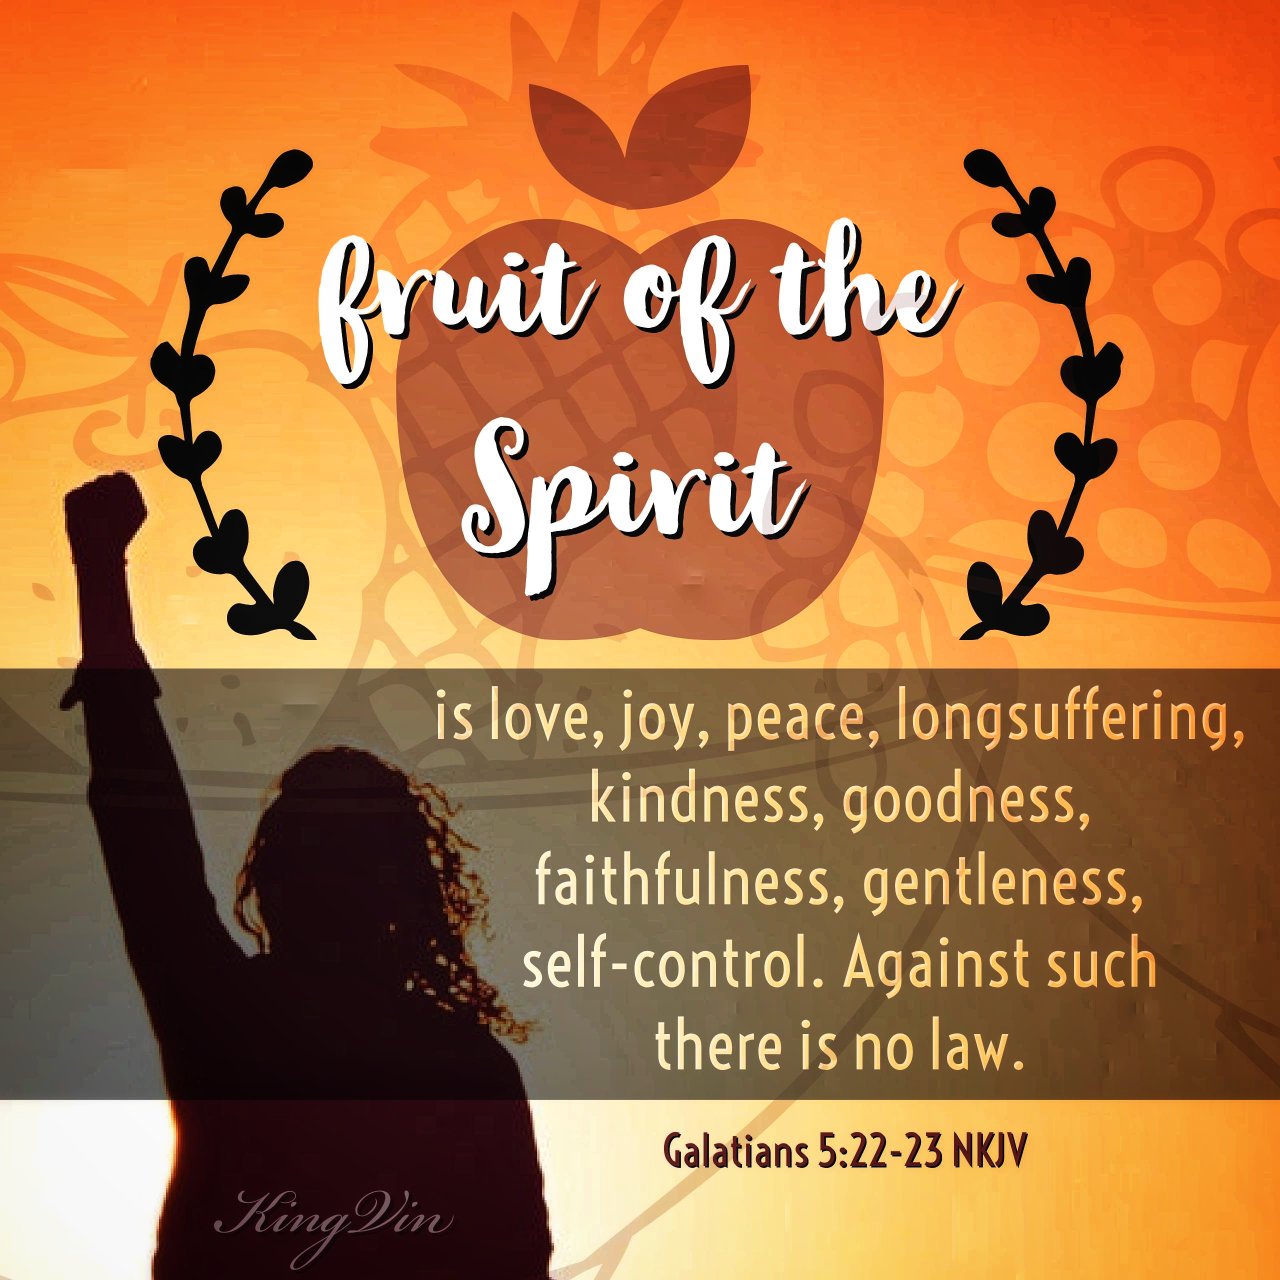 But the fruit of the Spirit is love, joy, peace, longsuffering, kindness, goodness, faithfulness, gentleness, self-control. Against such there is no law. Galatians 5:22‭-‬23 NKJV